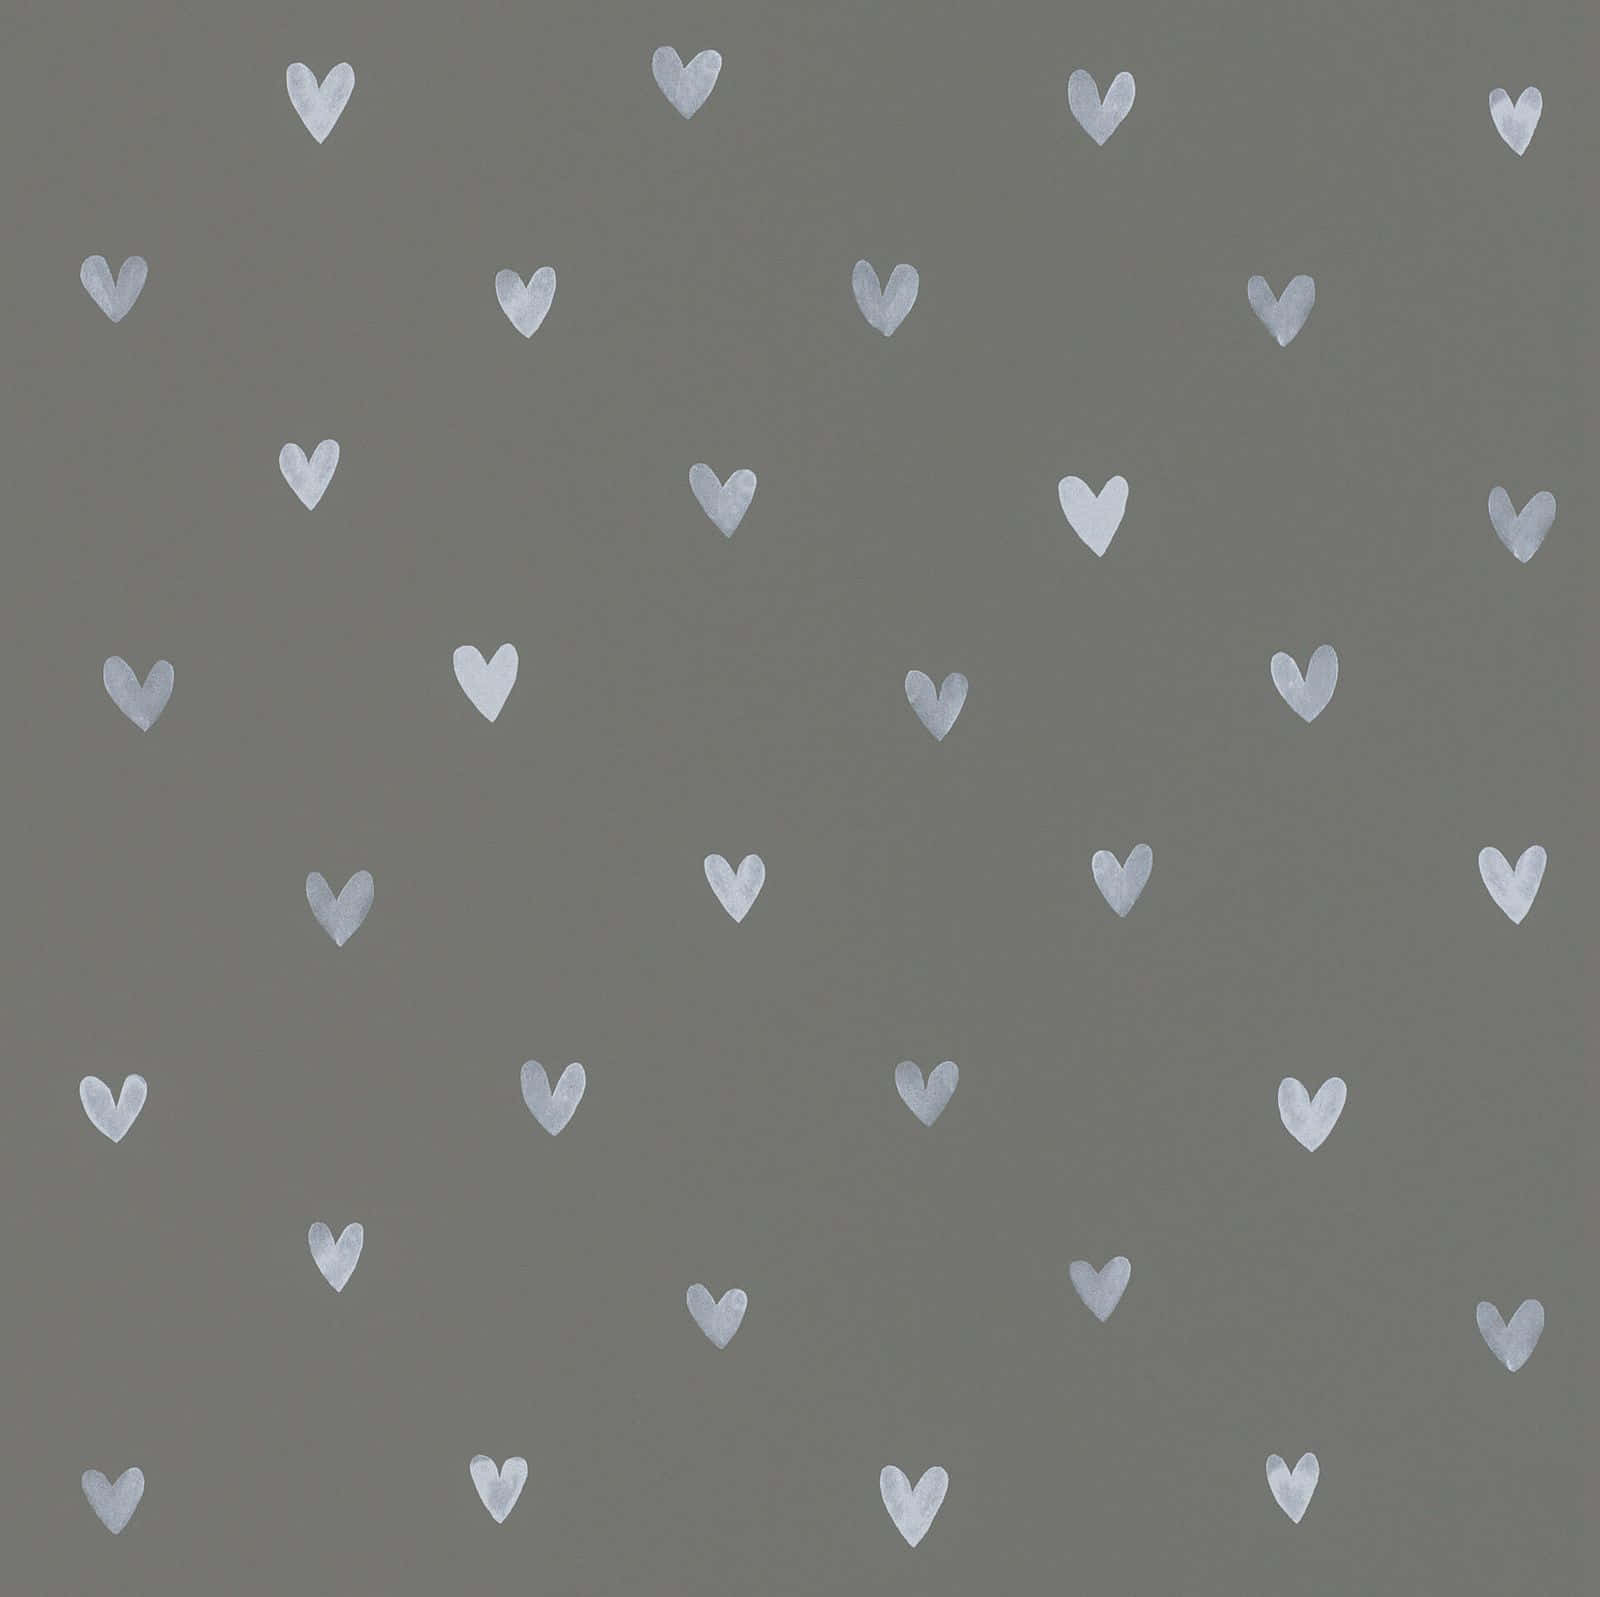 Collection of Adorable Hearts Wallpaper